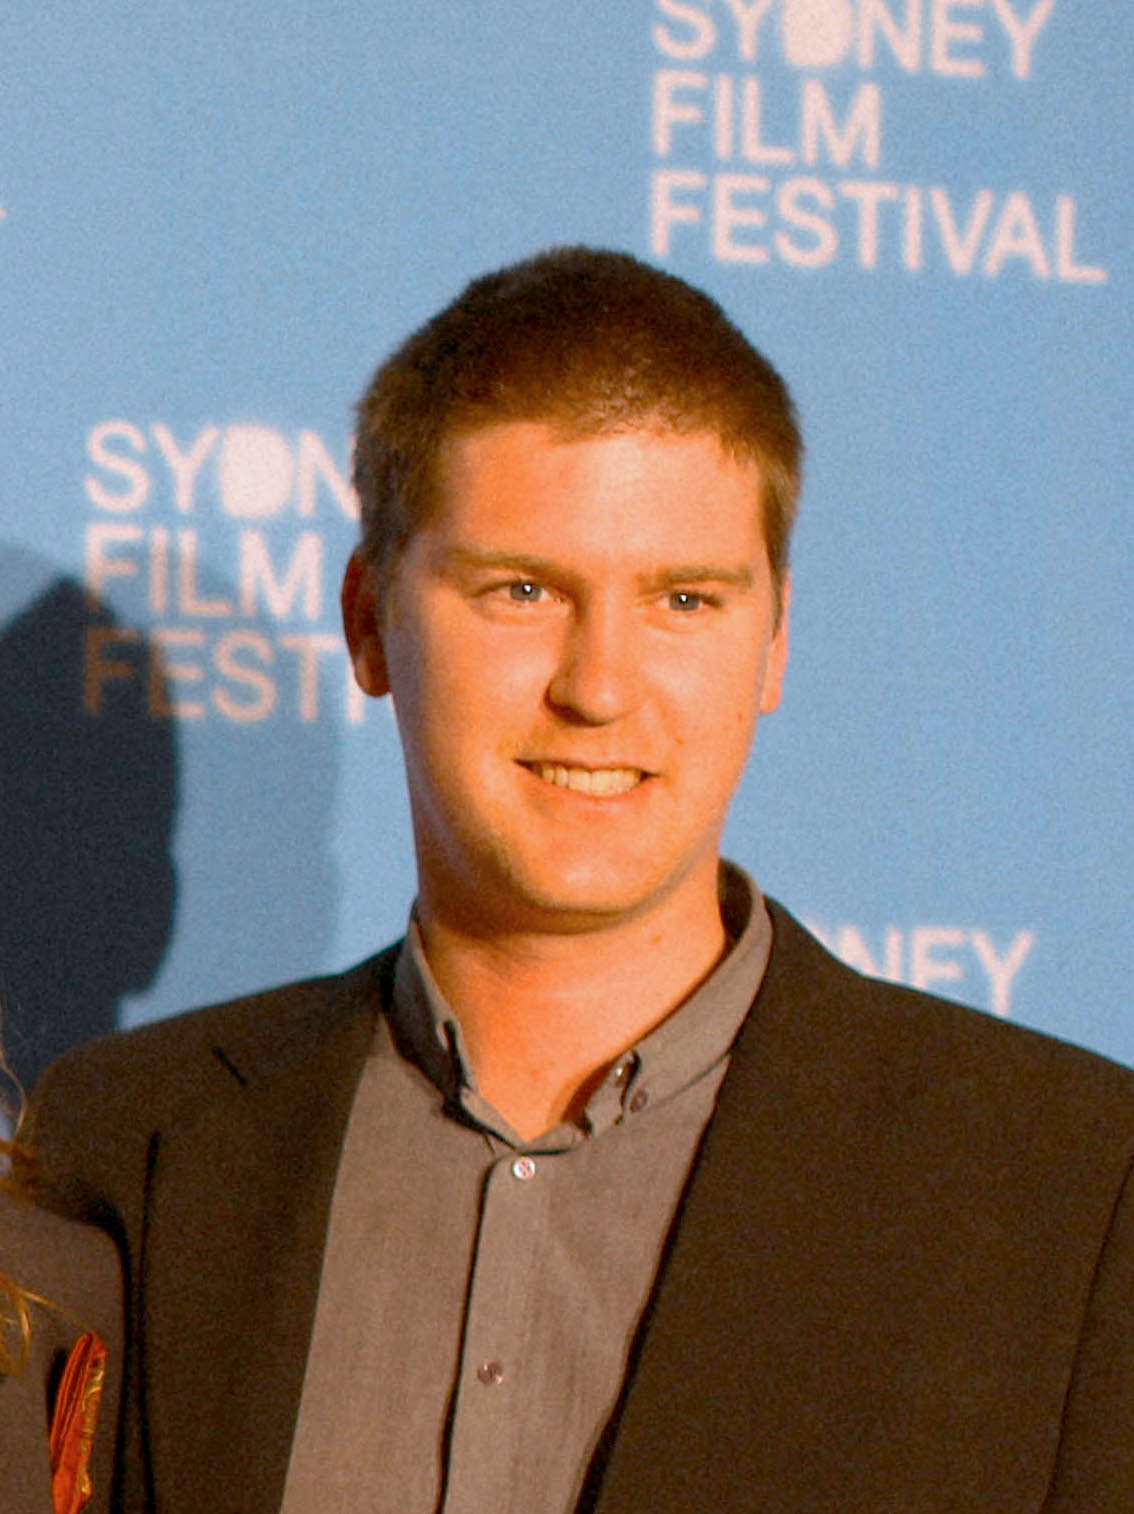 Rory Anderson at the Sydney film festival.